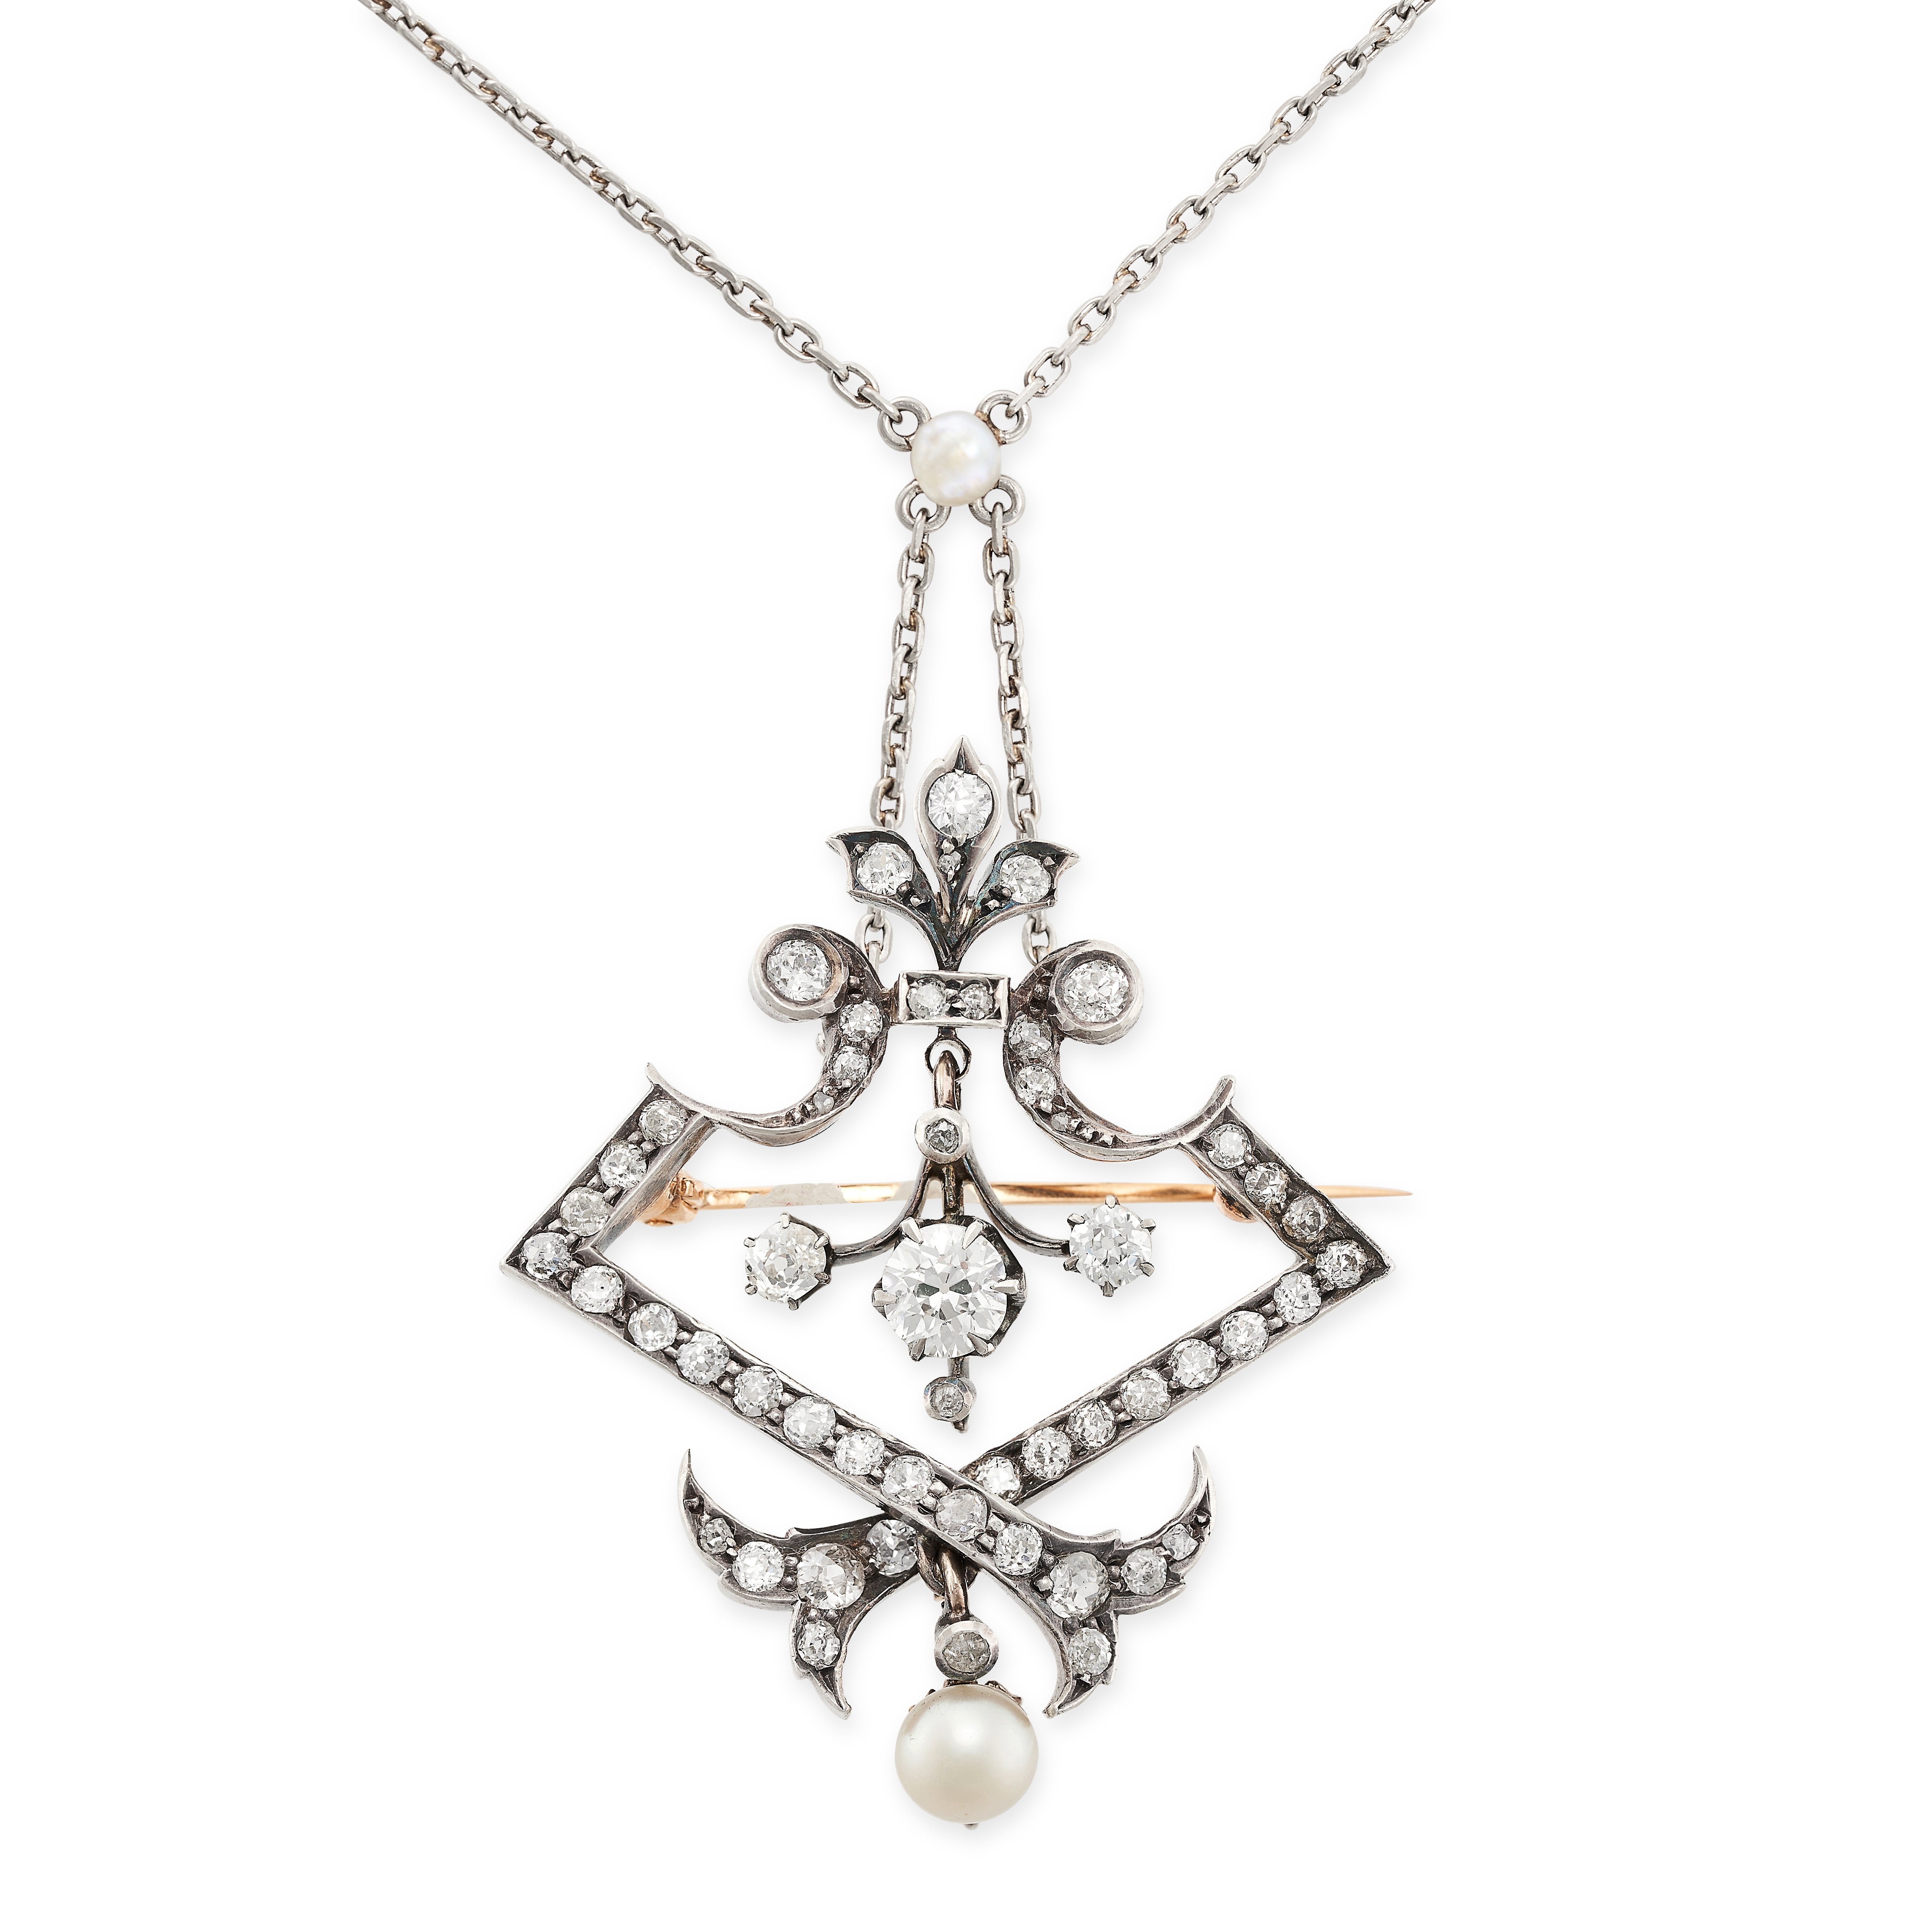 AN ANTIQUE DIAMOND AND PEARL NECKLACE WITH PENDANT / BROOCH the trace link chain set with a pearl